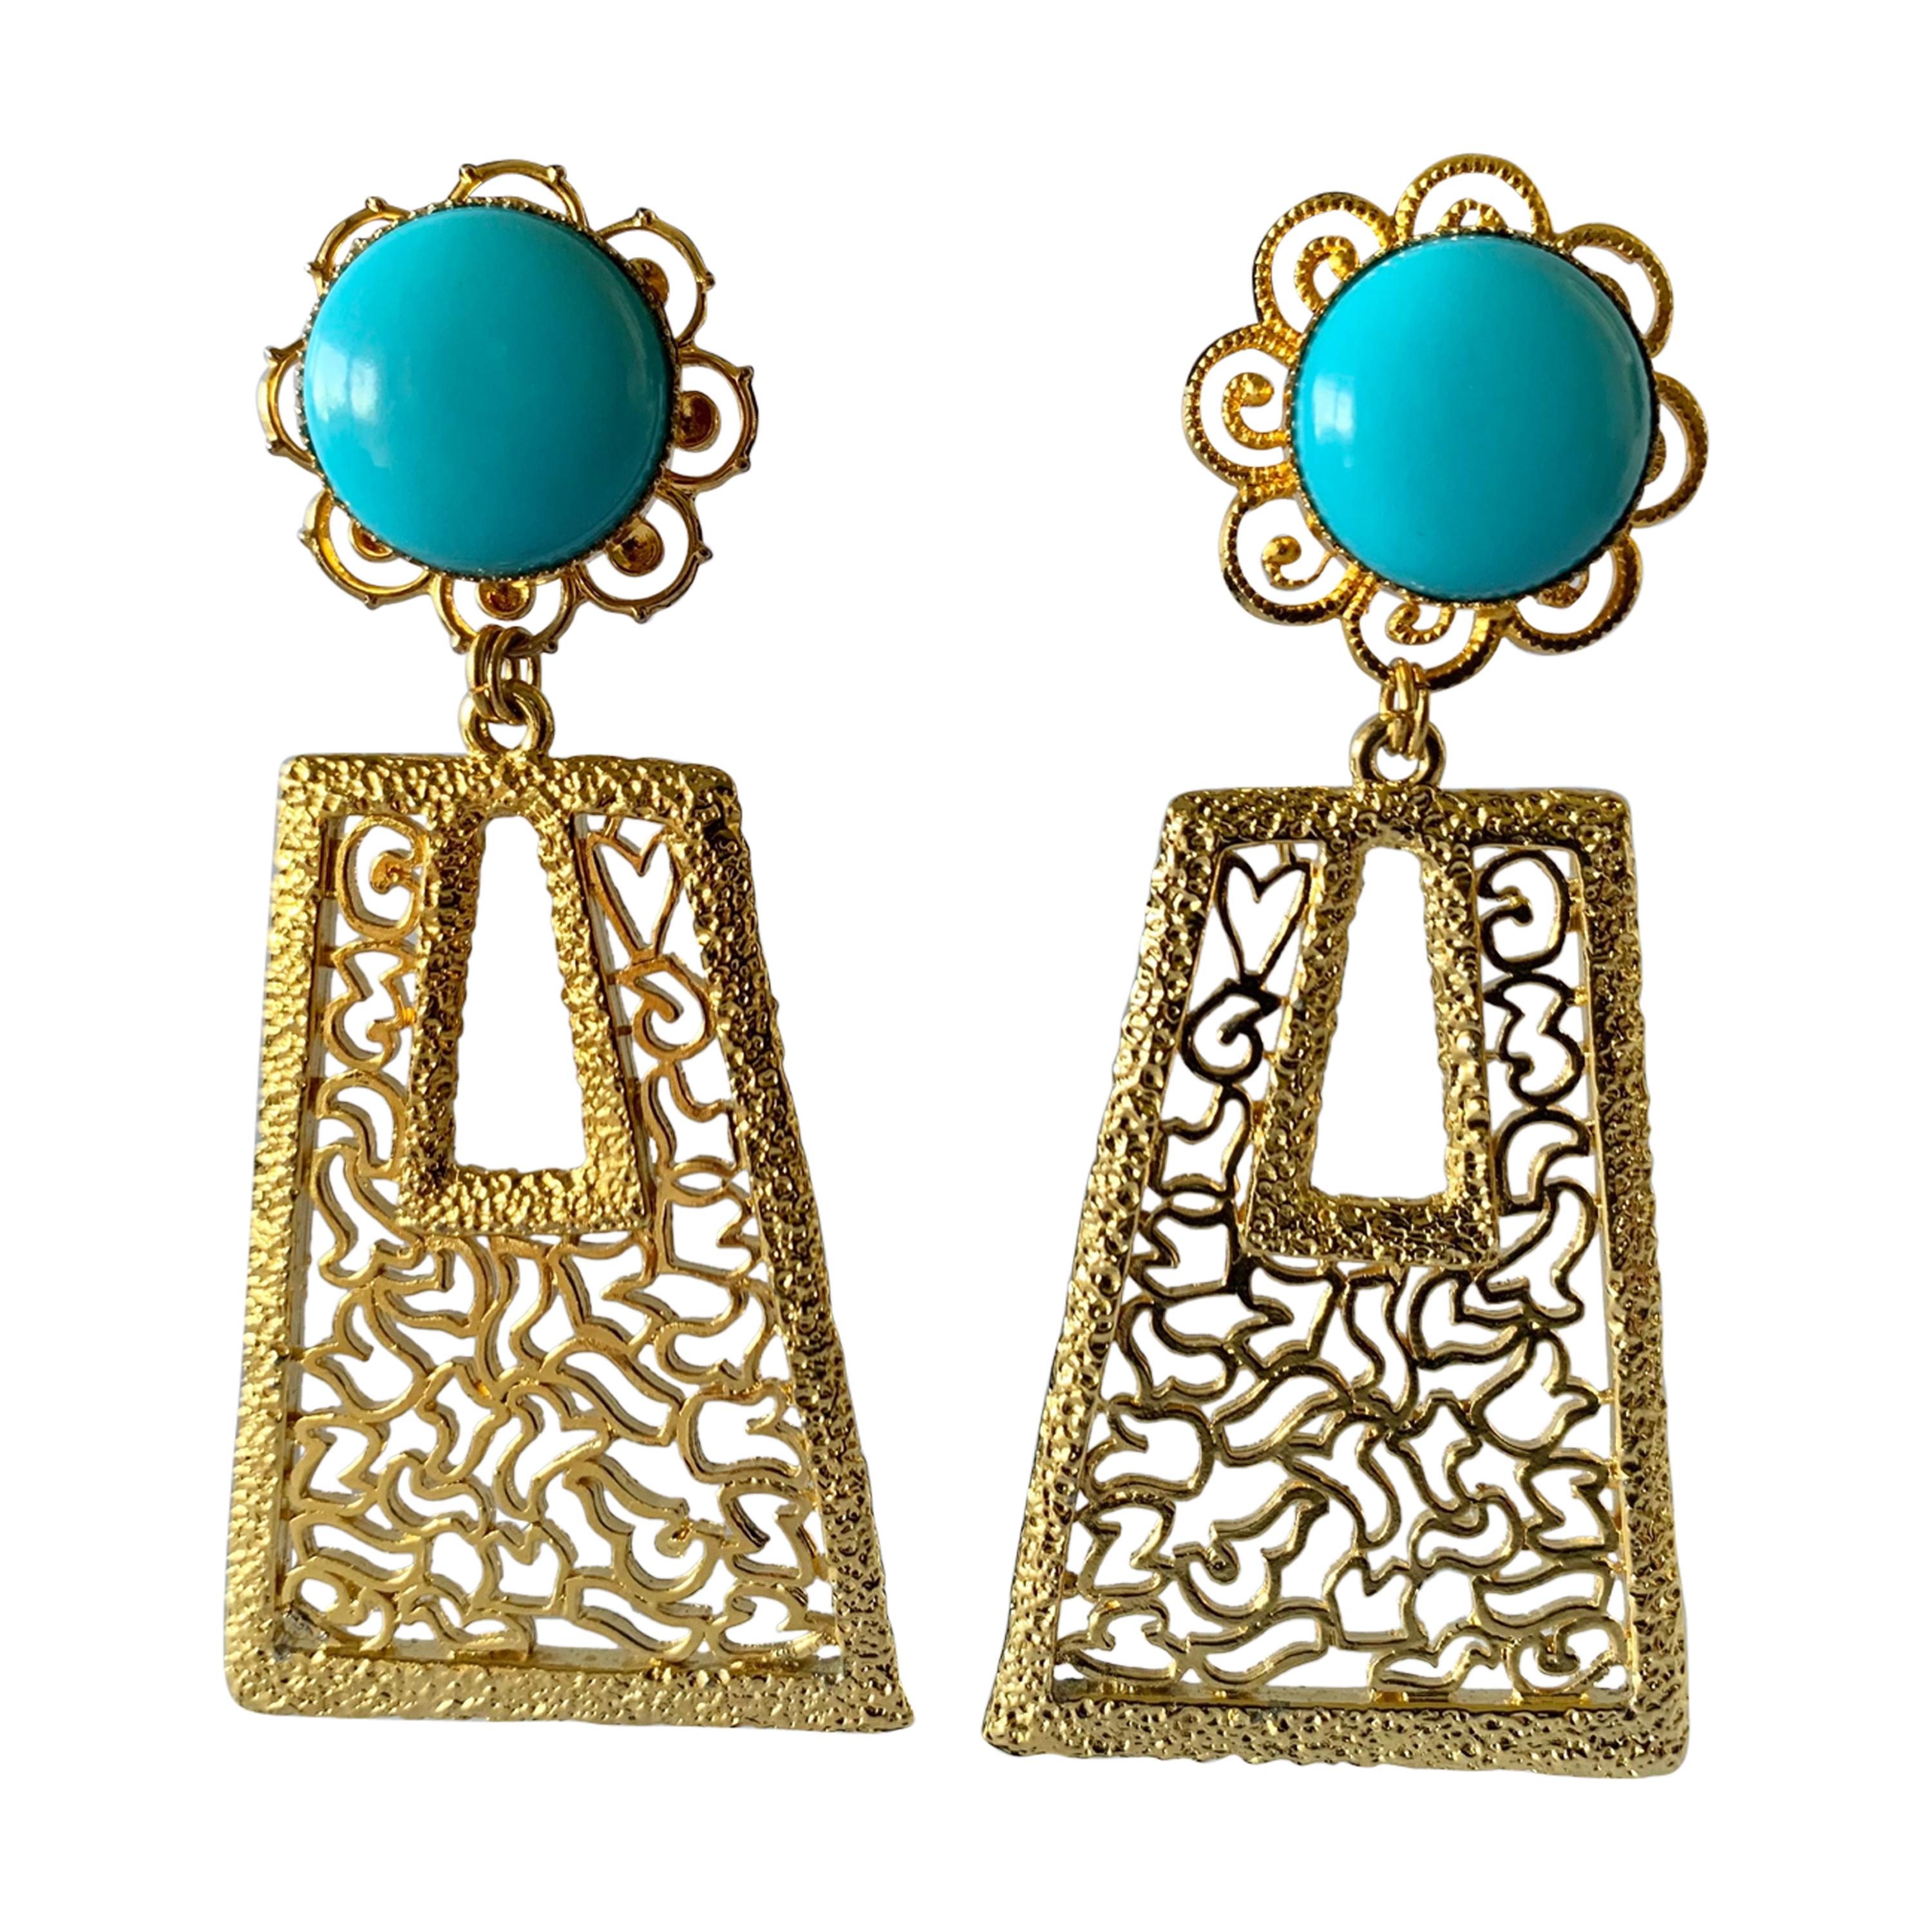 Vintage 1960's Geometric Turquoise Gold Statement Earrings